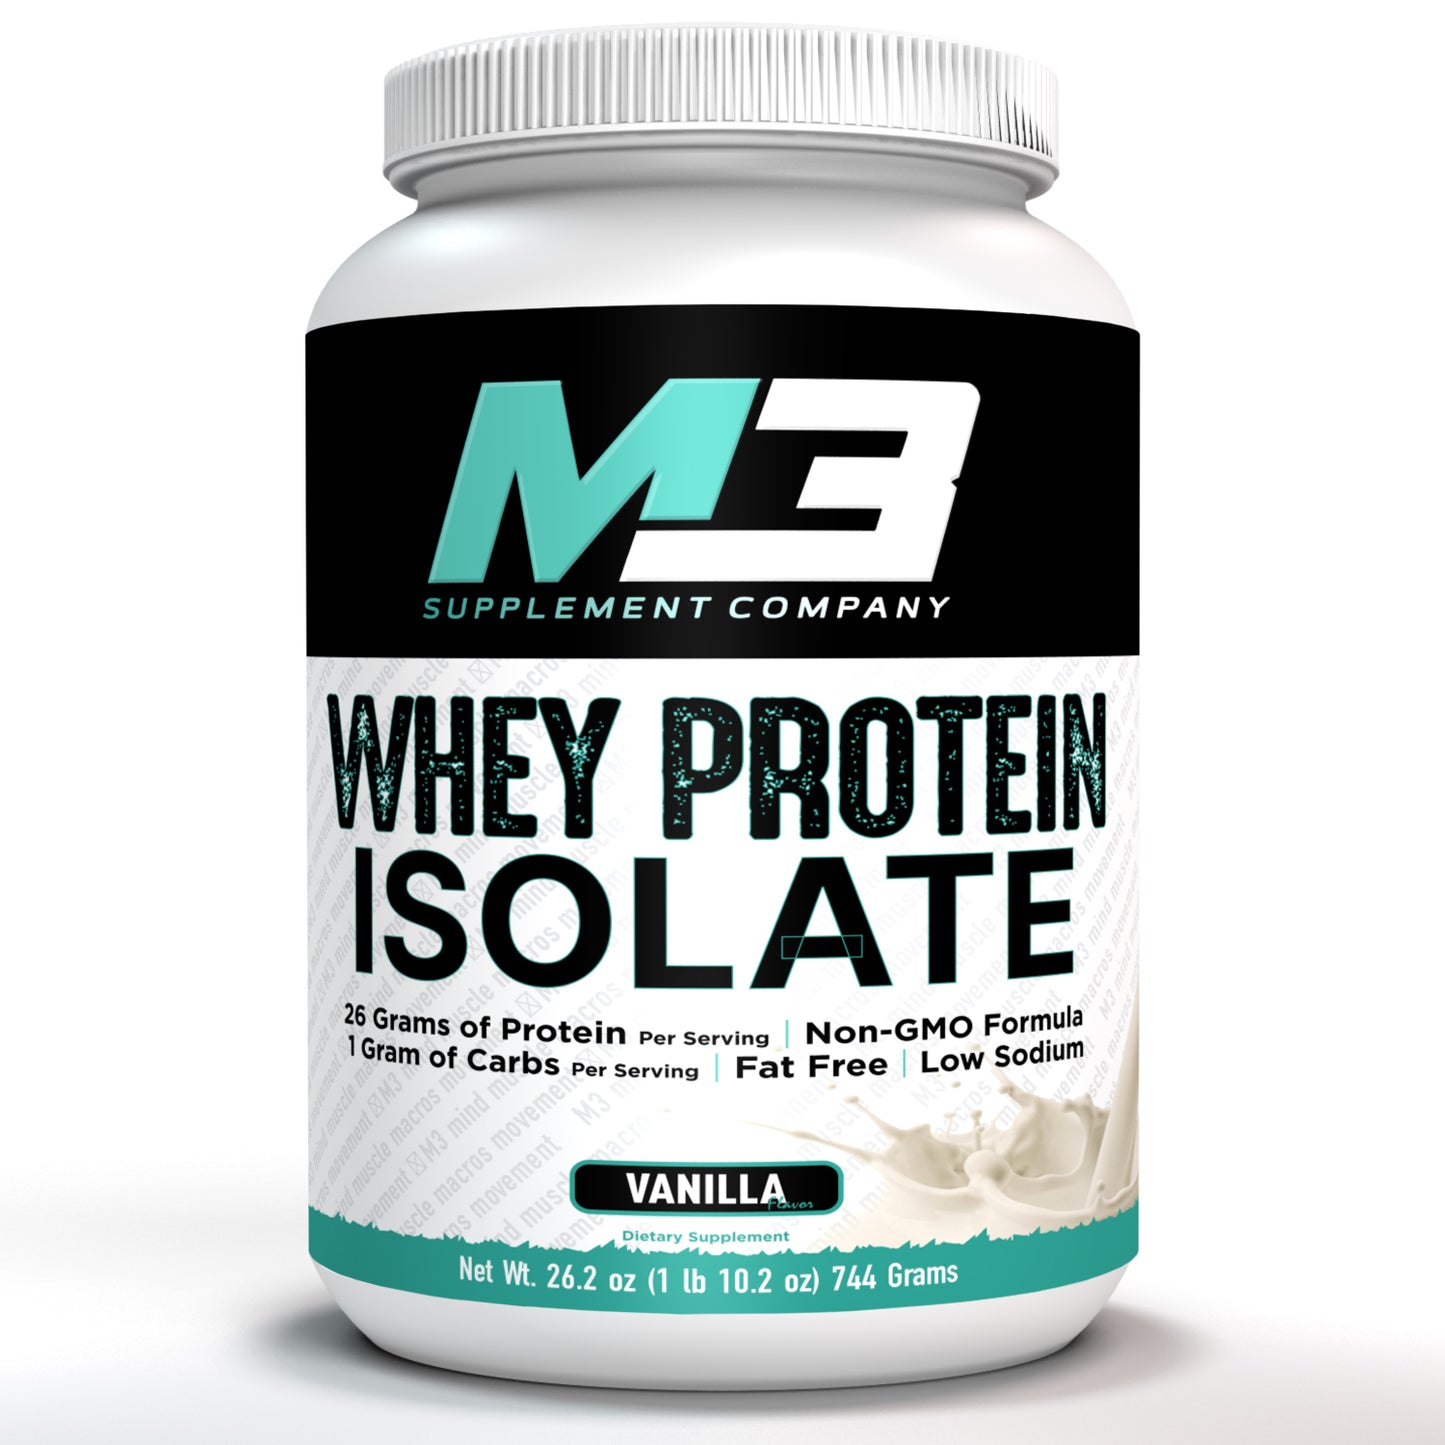 Whey Protein Isolate Vanilla + M3 Ultimate Cleanse + M3 Green Coffee Bean 60 Capsules-30 Day Supply